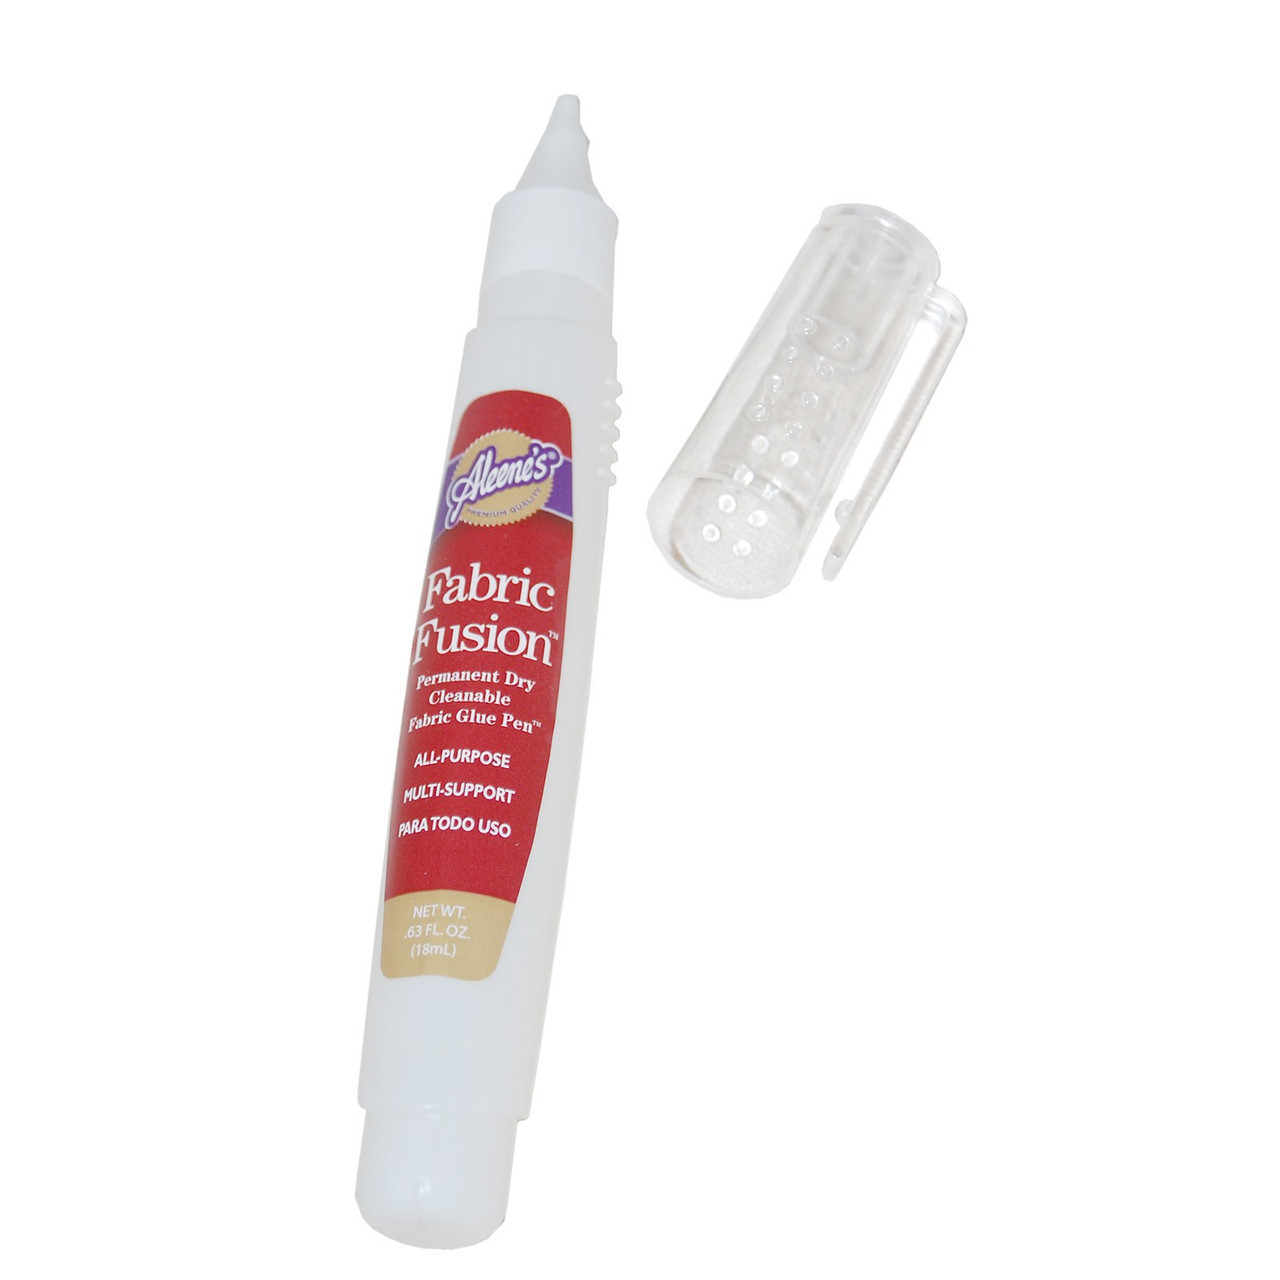 Quick Dry Fabric Fusion Adhesive 4 fl oz - The Sewing Place